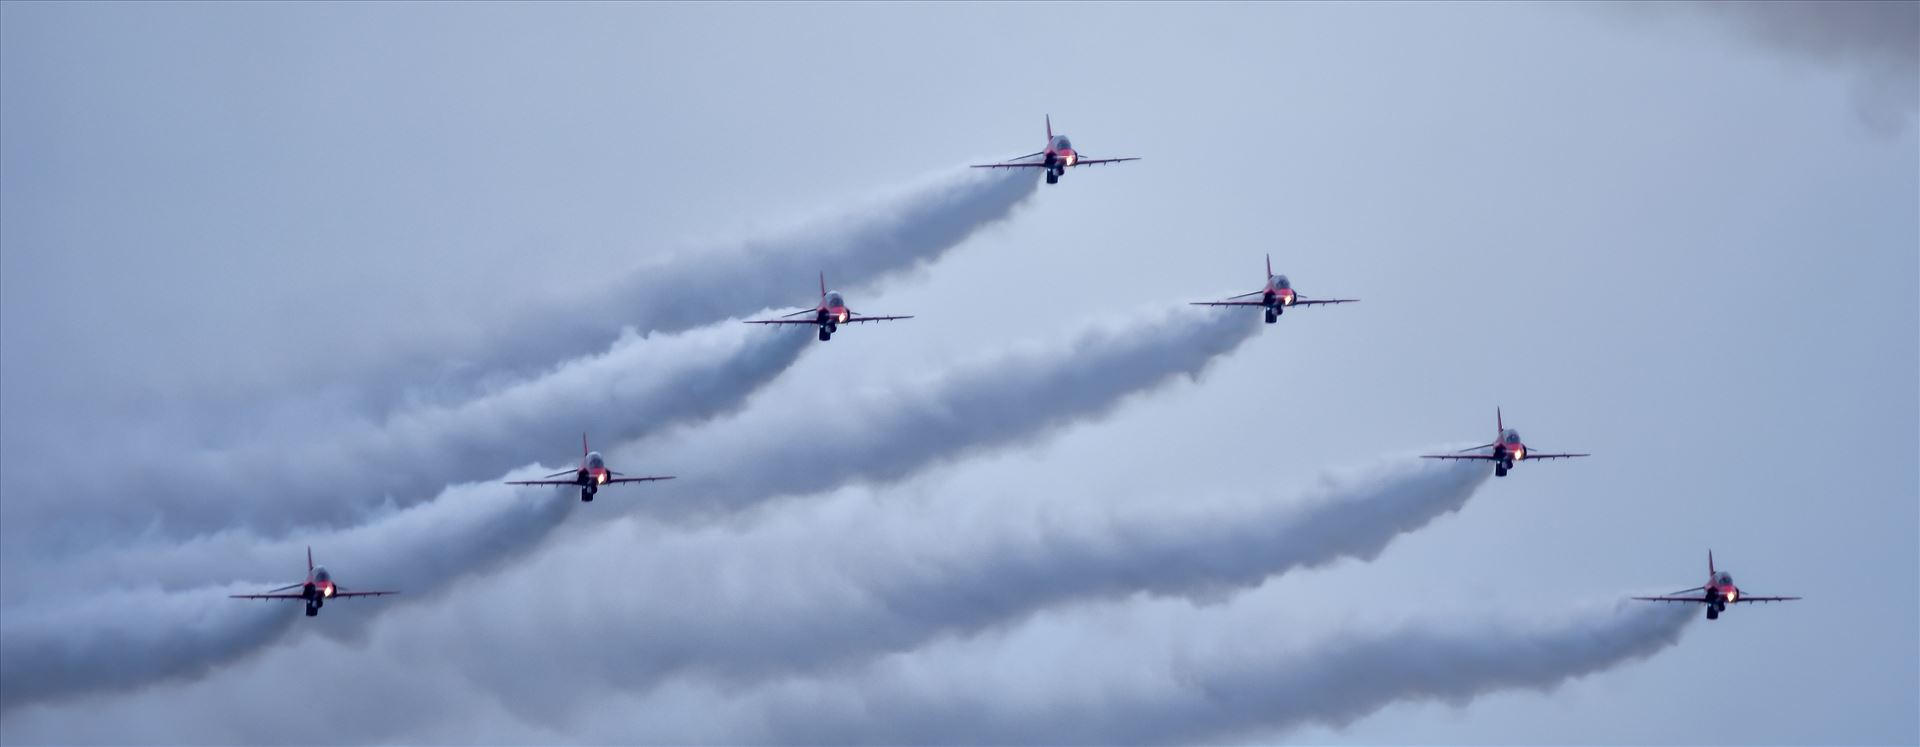 Red Arrows - The Red Arrows taken at the Sunderland air show 2016 by philreay